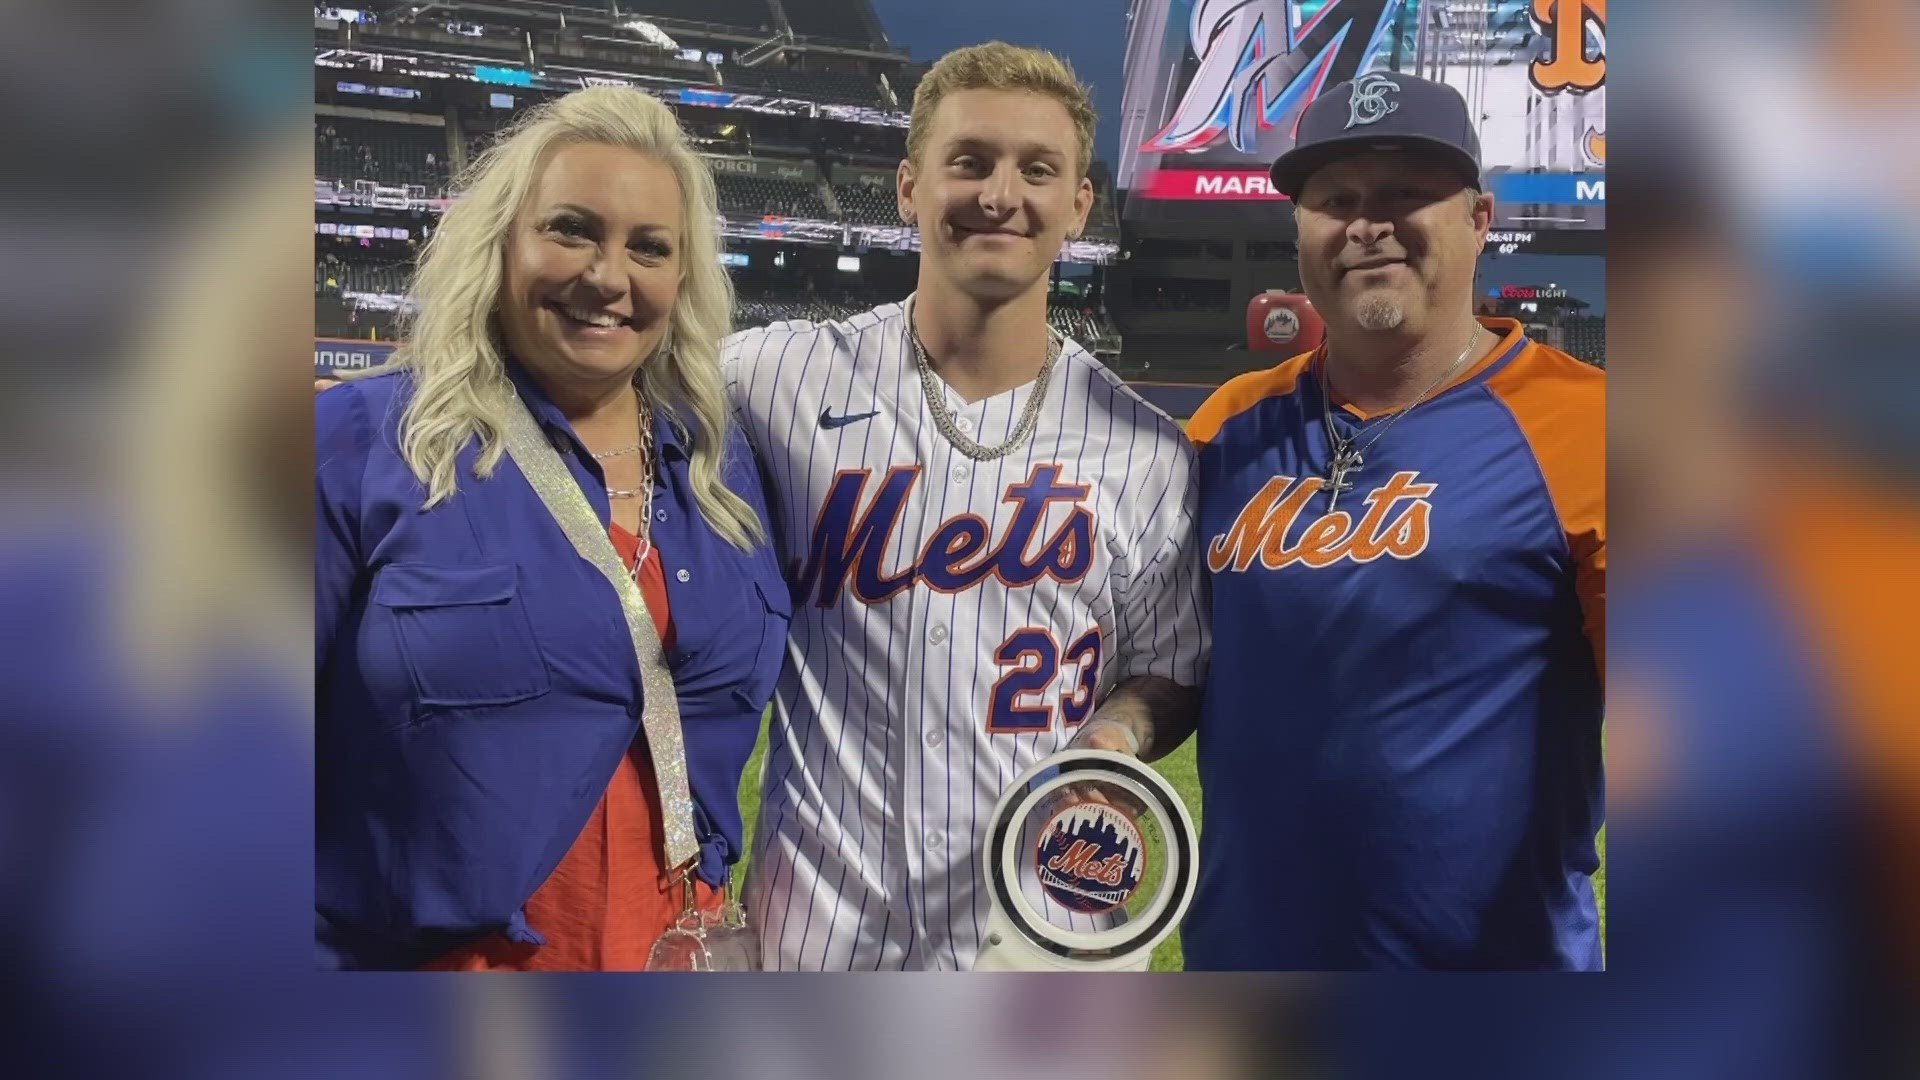 The former Rockwall Heath High School product is the Mets' No.1 prospect, according to Baseball America.